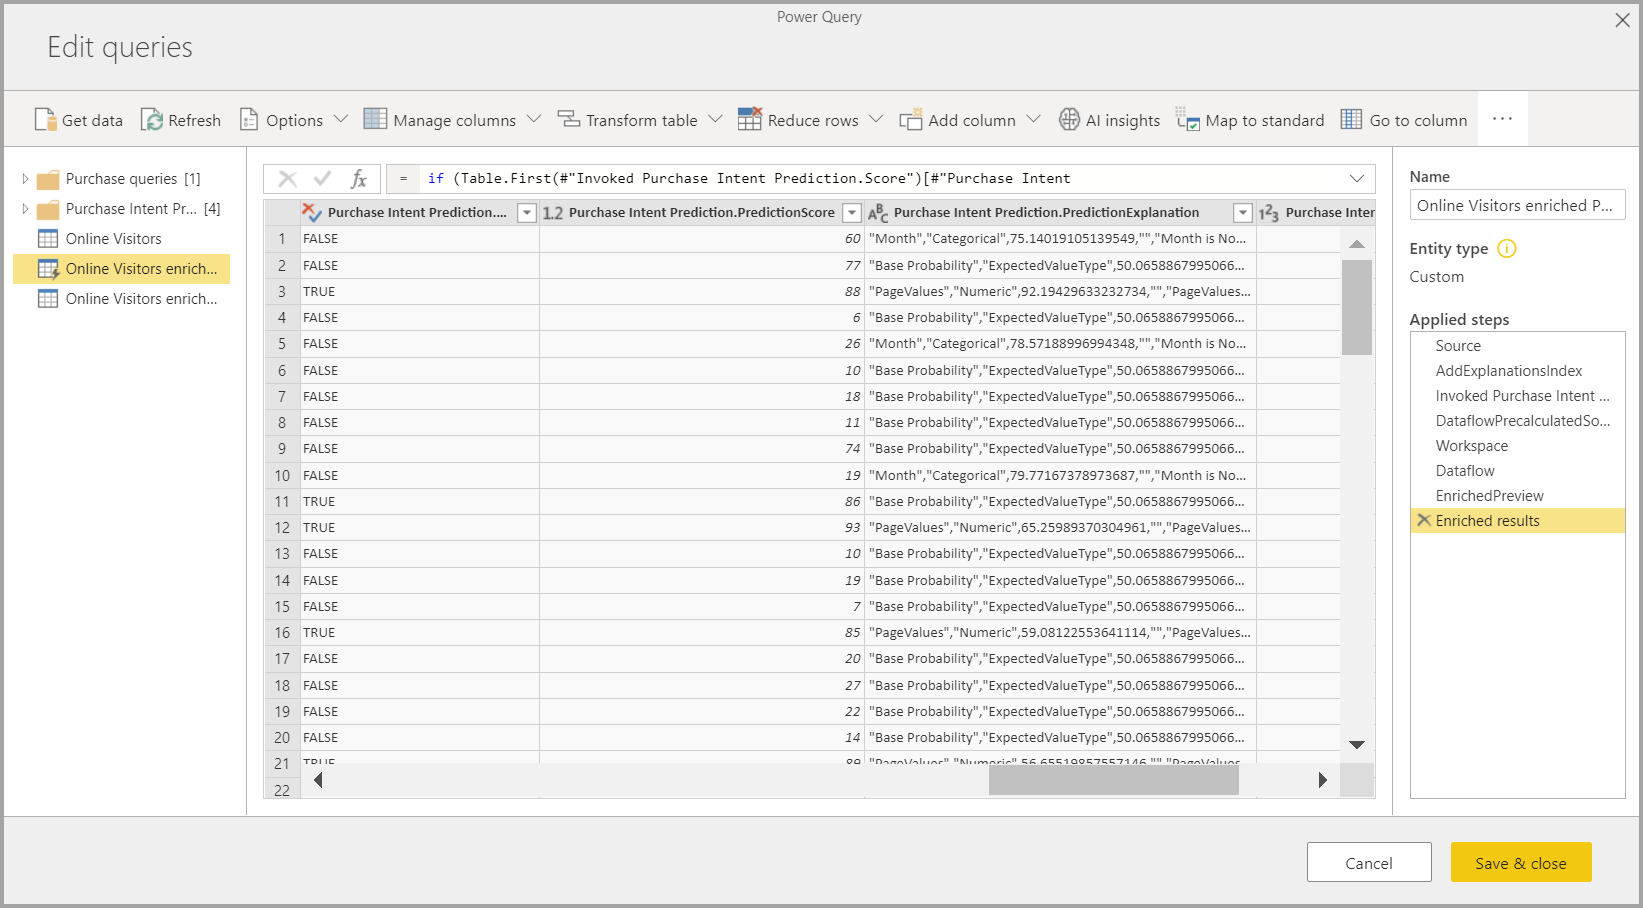 Screenshot of Power Query showing the AutoML results.